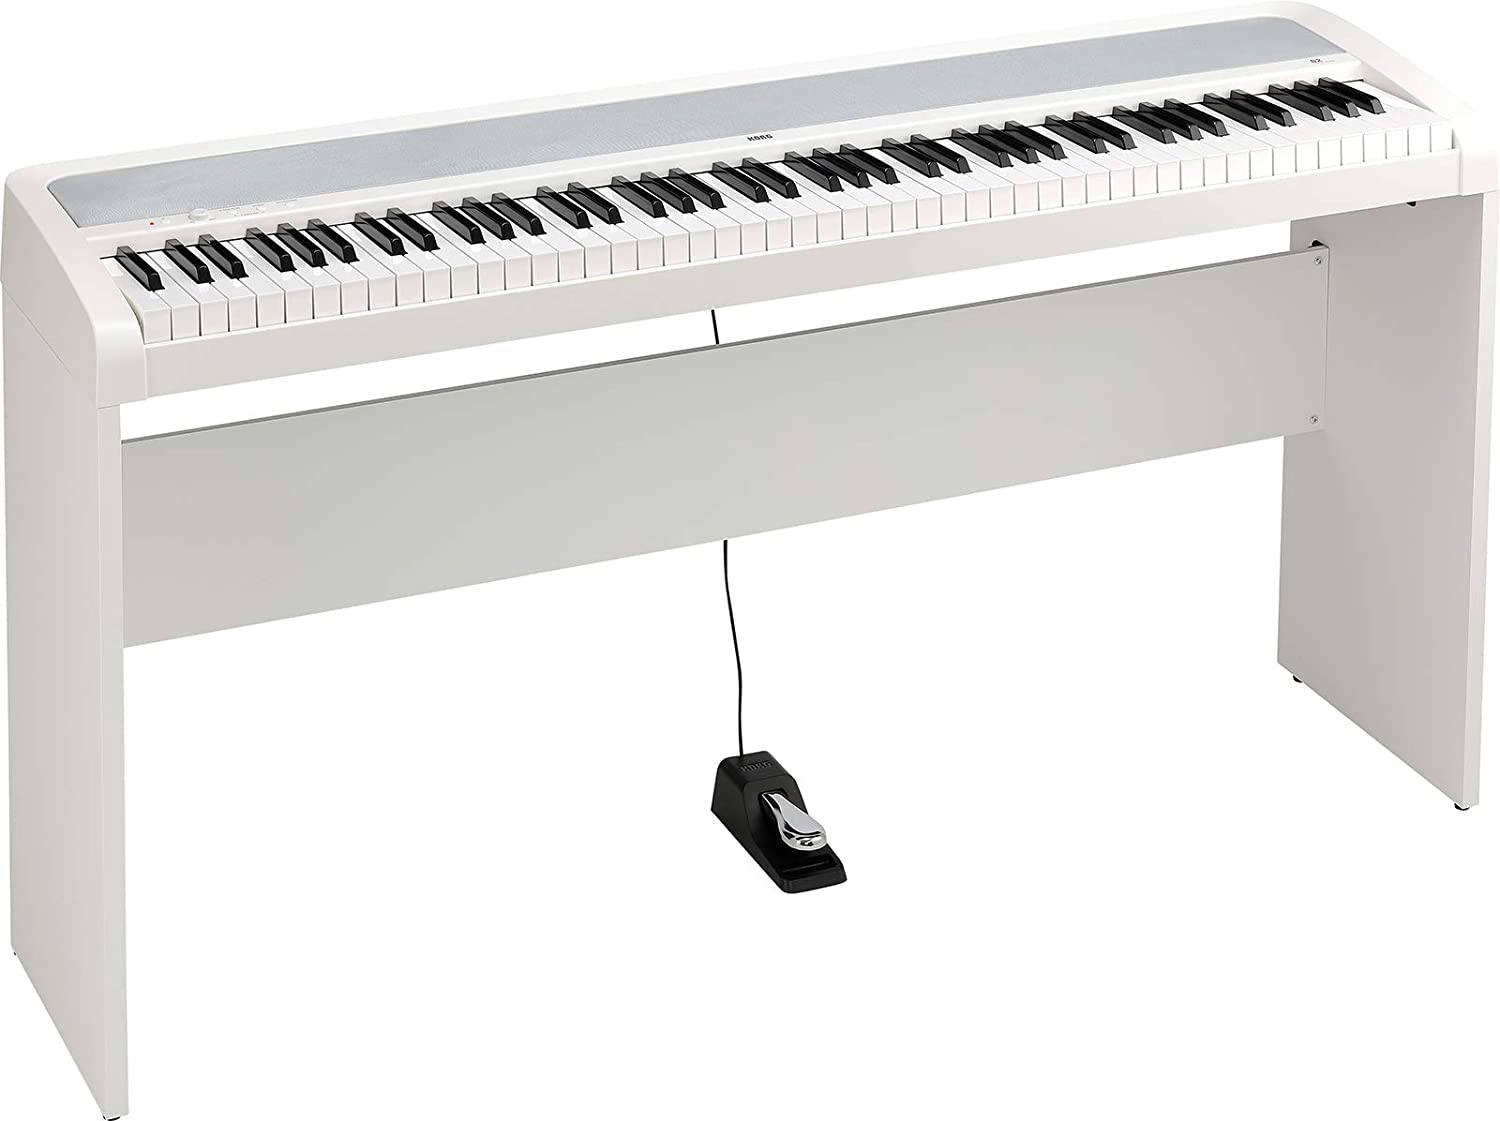 B2N 88-Key Digital Piano with Light Touch Action and Speakers